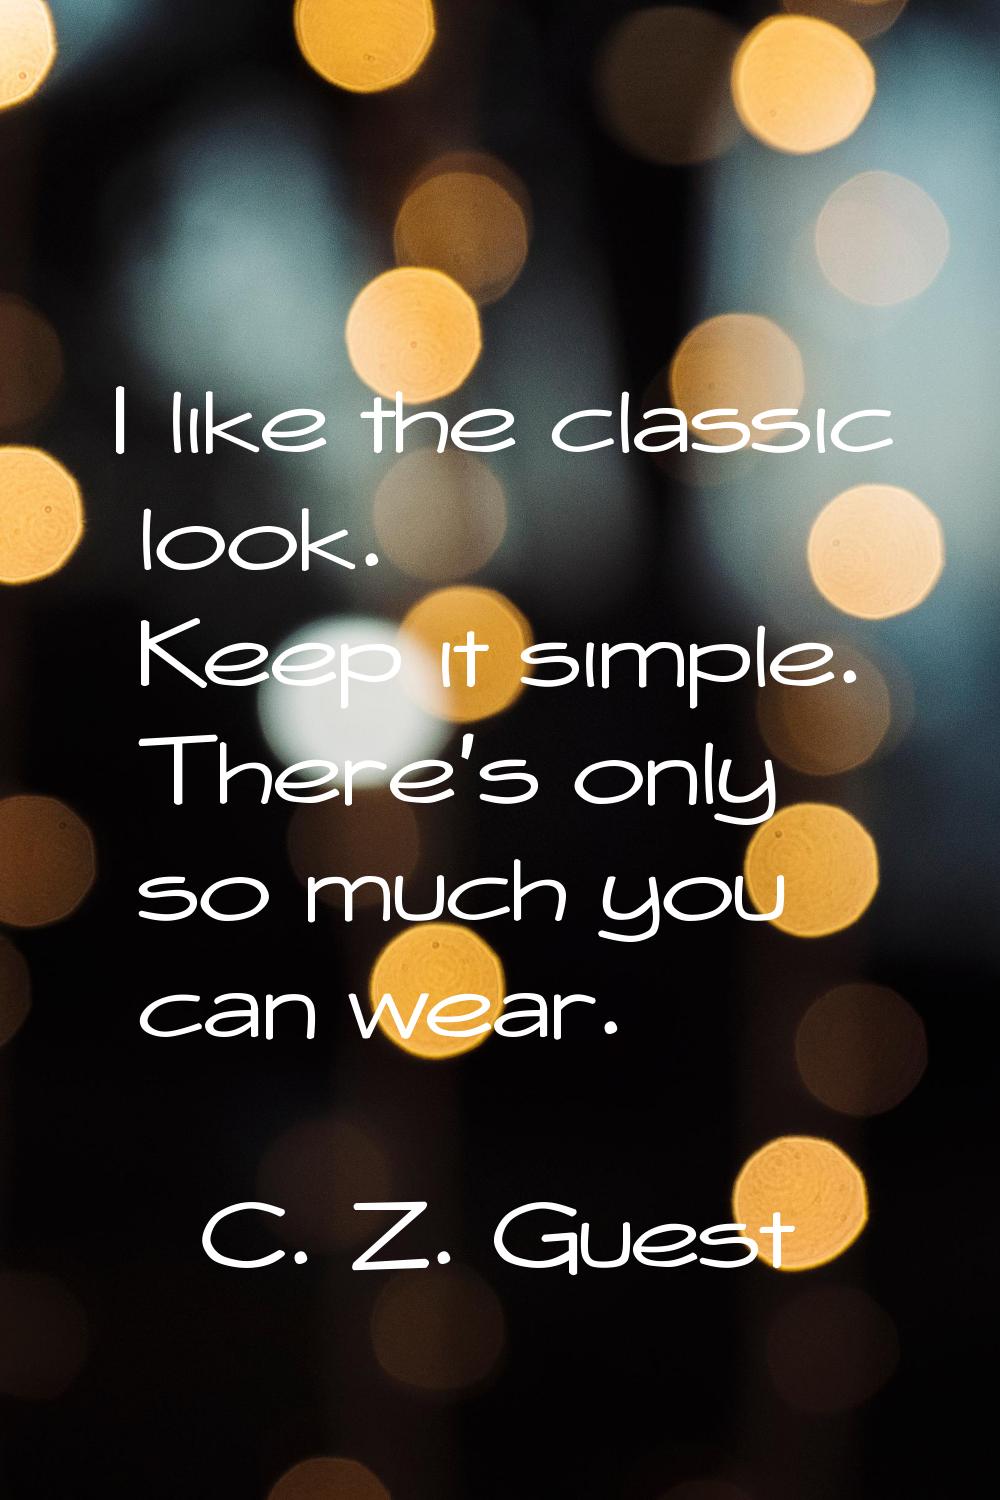 I like the classic look. Keep it simple. There's only so much you can wear.